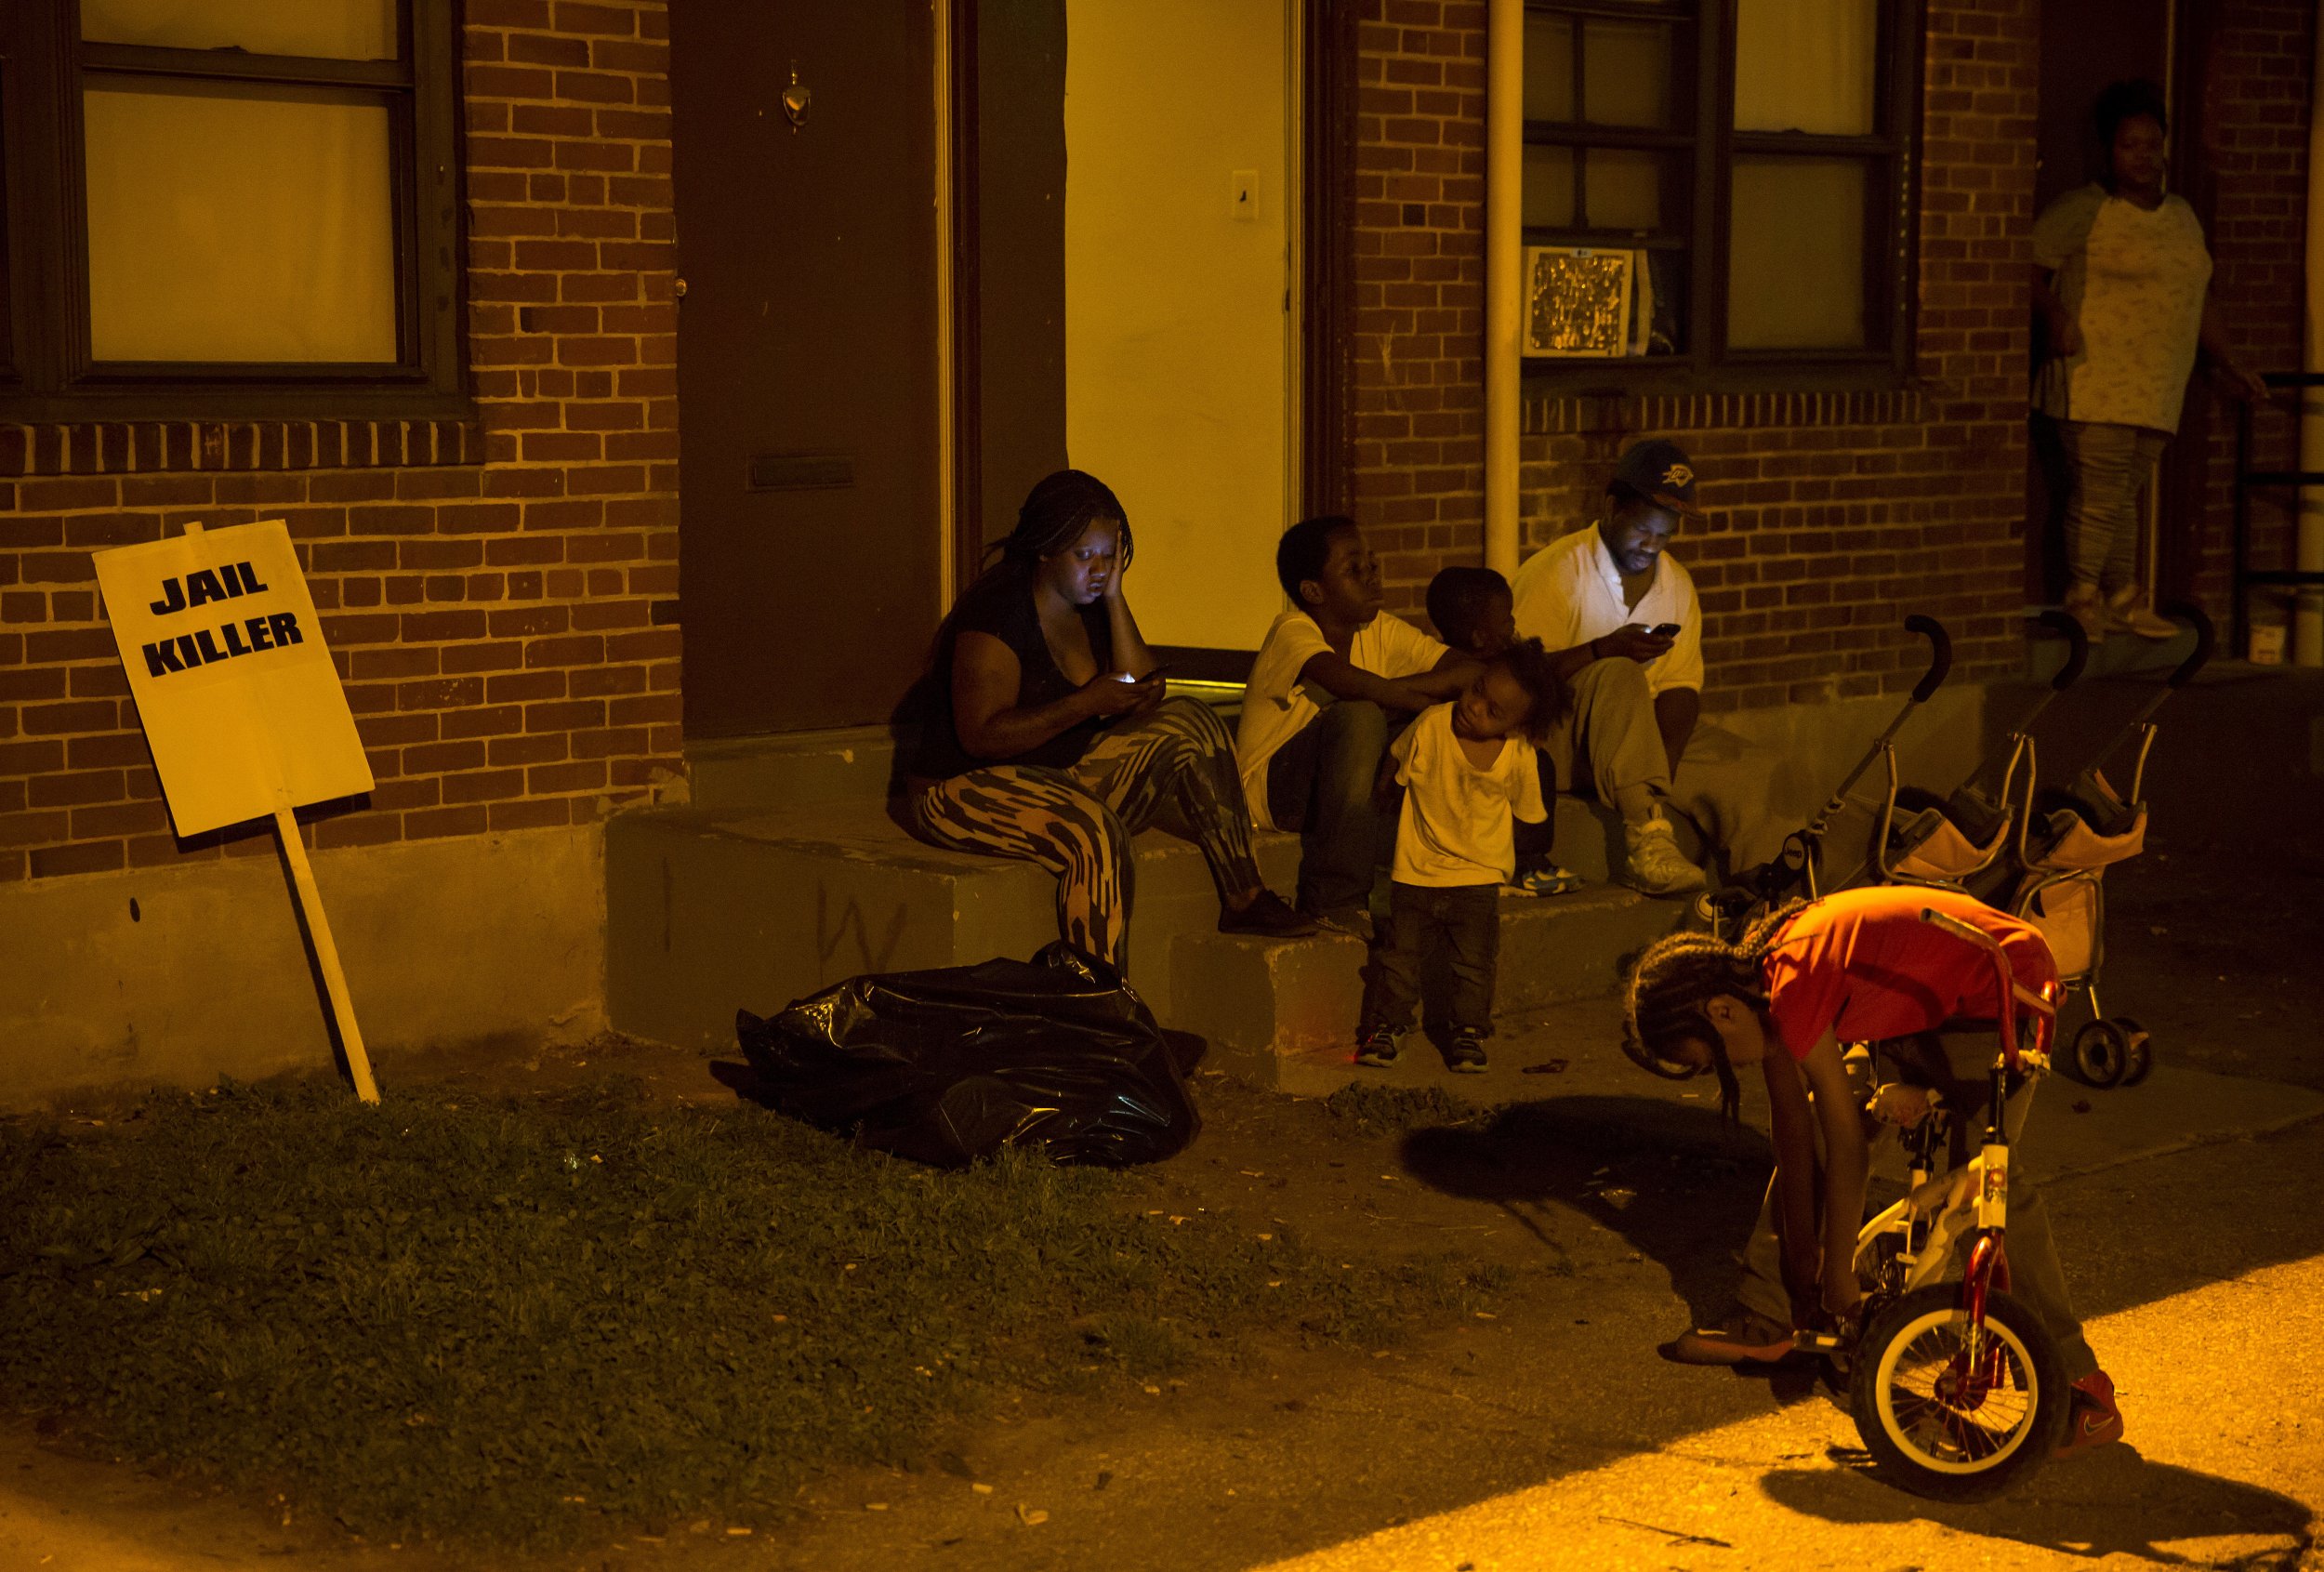 Baltimore Rent Eviction Crisis: City Overrun By Corrupt Landlords